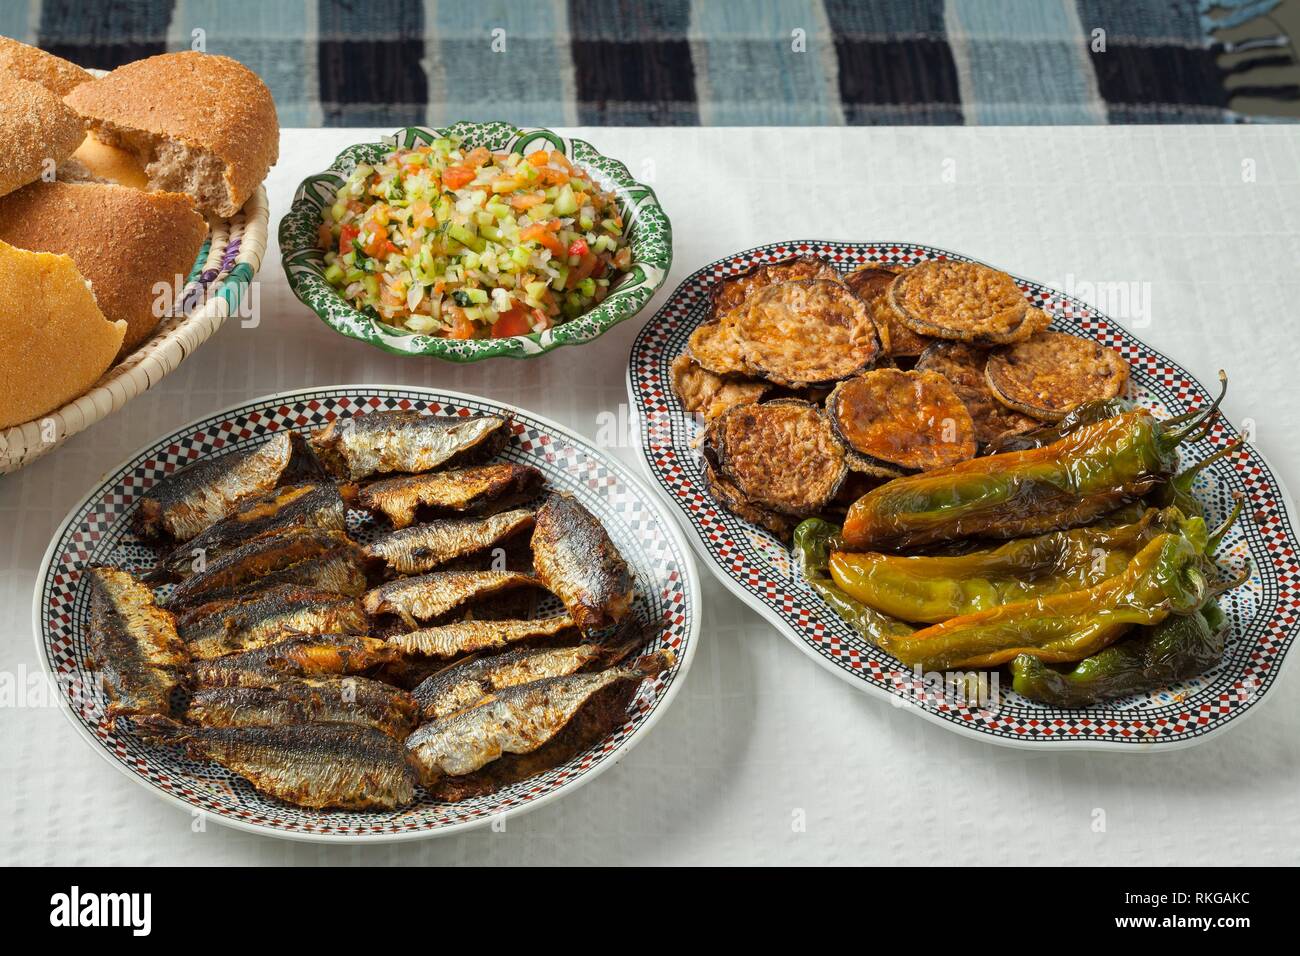 Moroccan meal with stuffed sardines, dishes with vegetables and a basket with bread. Stock Photo